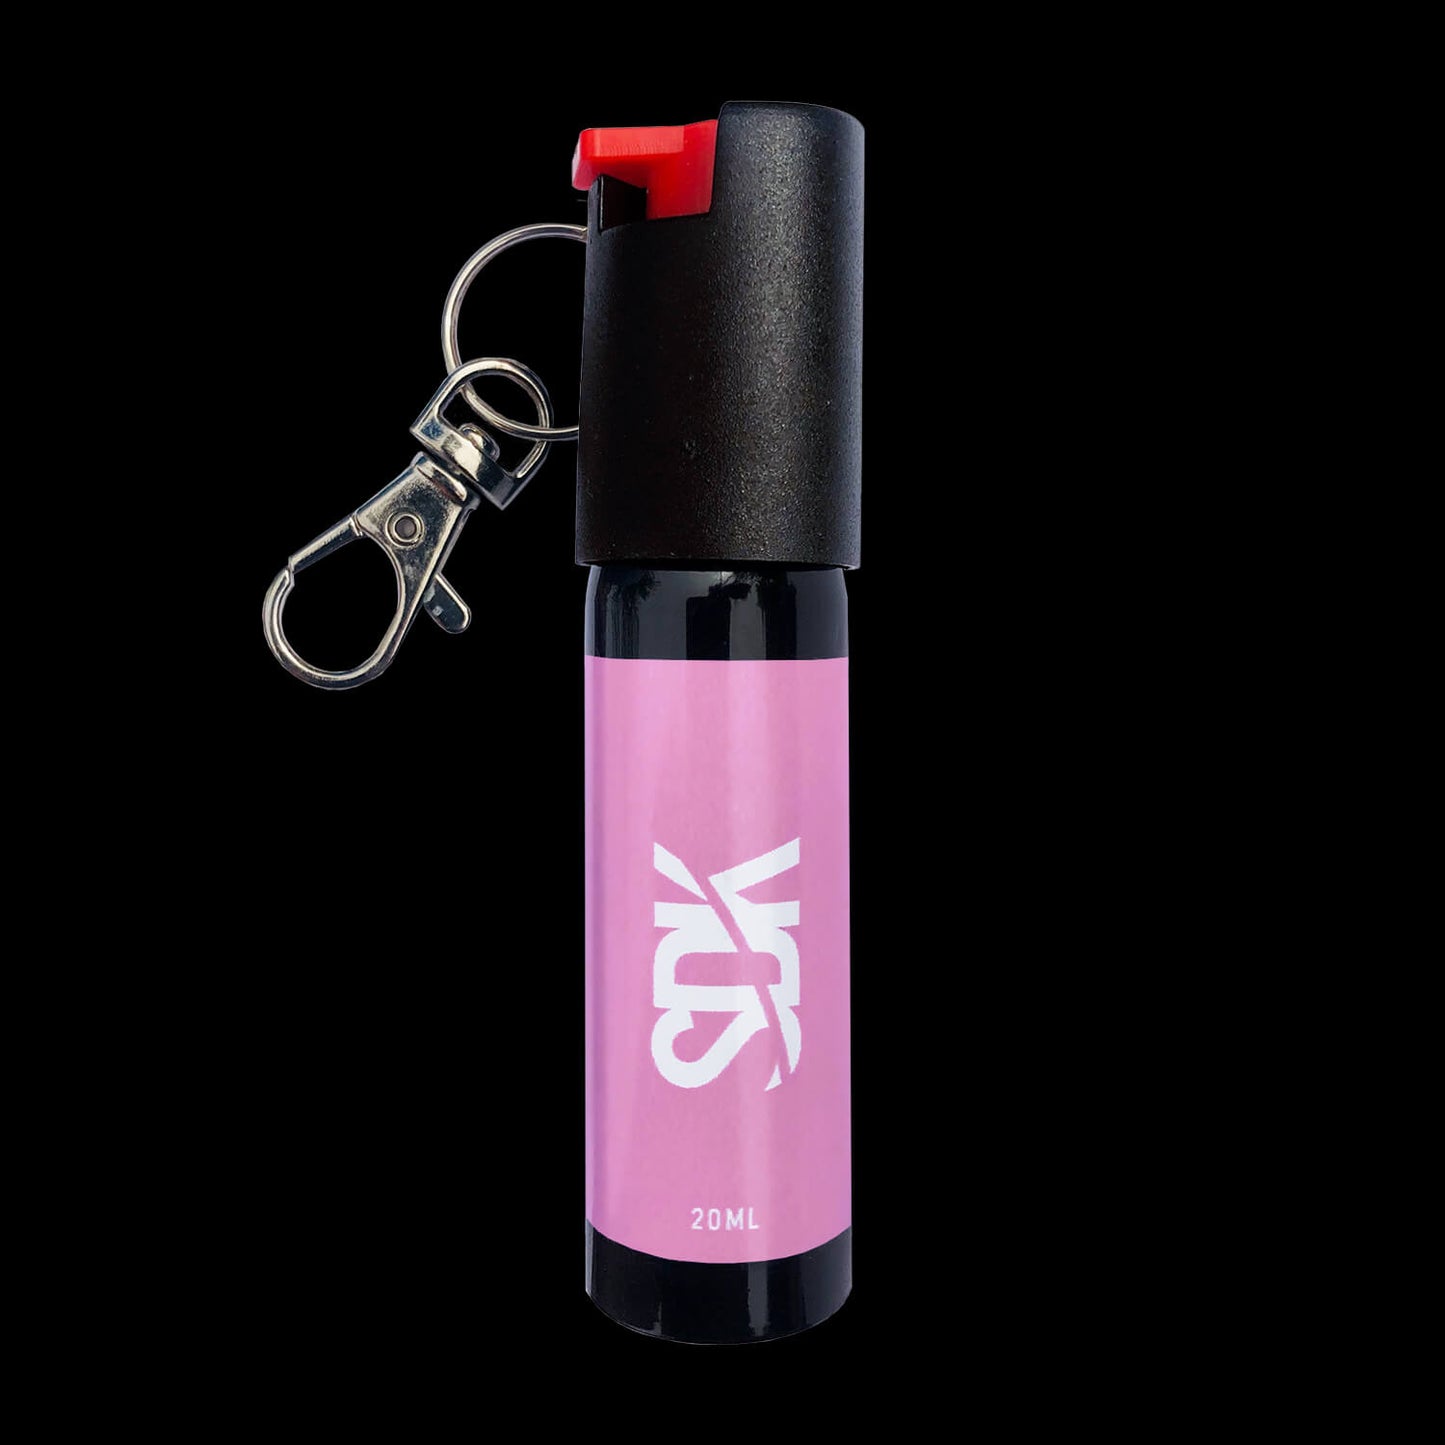 SDK Pepper Spray Pink (20ml compact Pepper Spray with keychain attachment)